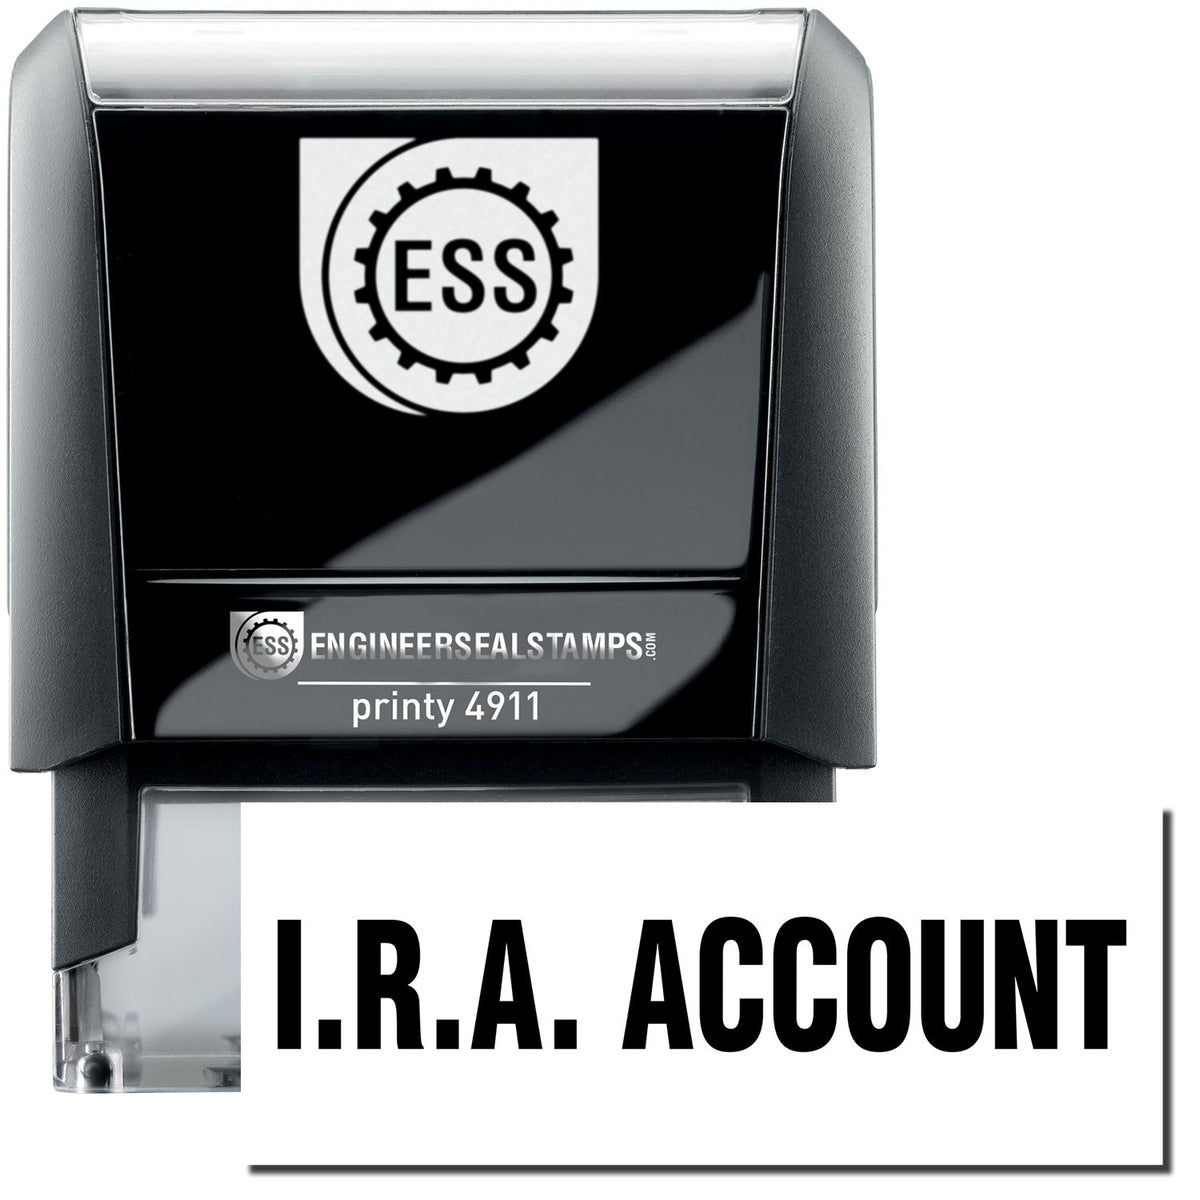 A self-inking stamp with a stamped image showing how the text &quot;I.R.A. ACCOUNT&quot; is displayed after stamping.